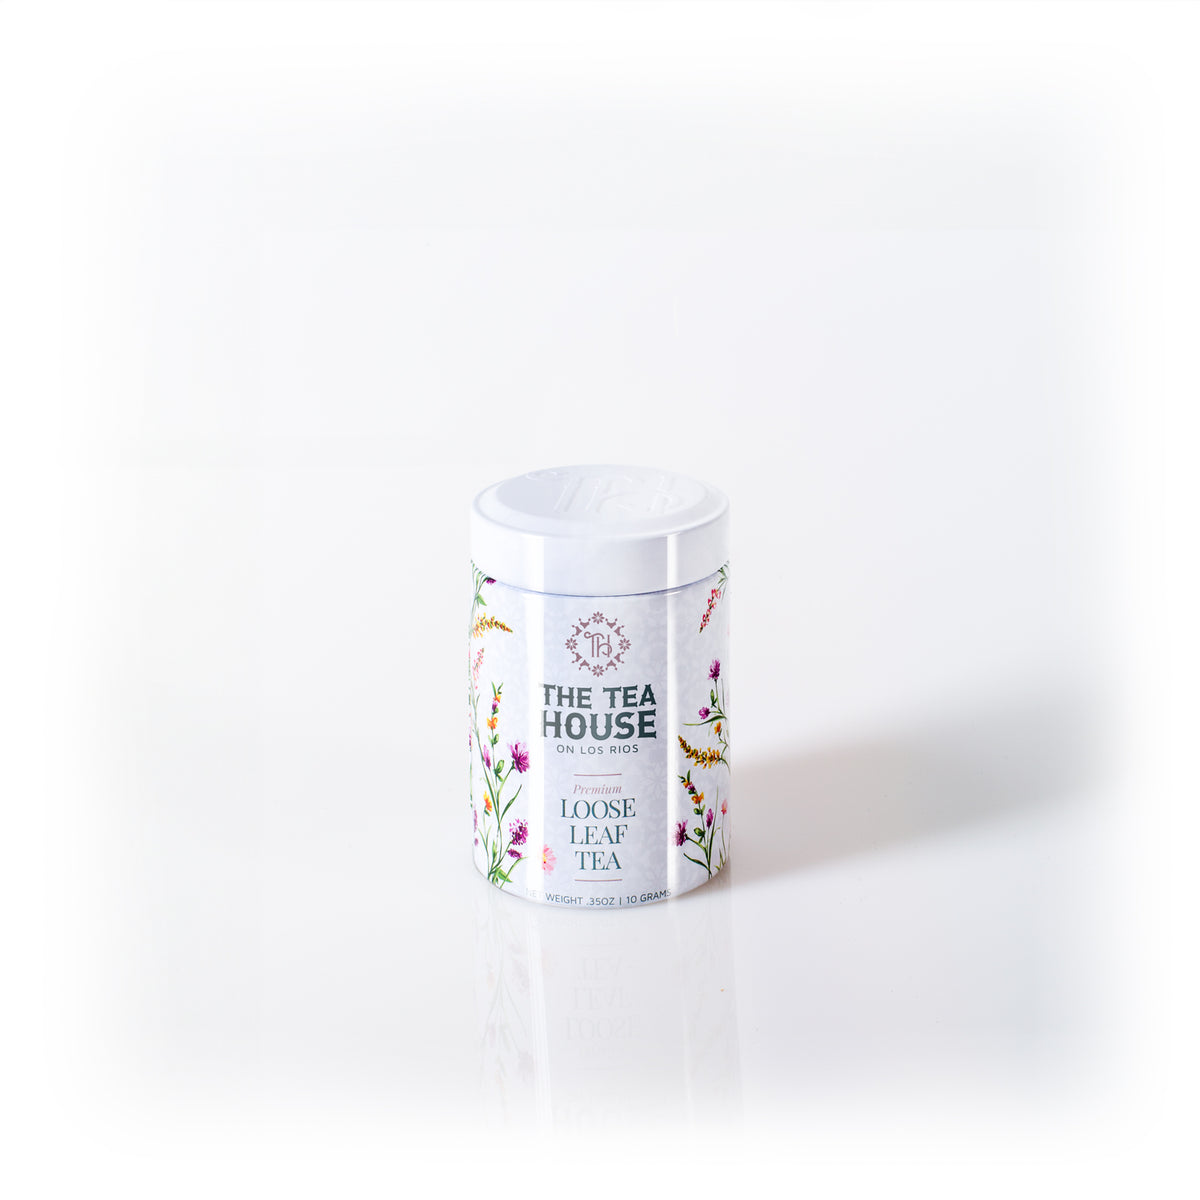 Discover The Tea House on Los Rios with this 10g Loose Leaf Tea Tin